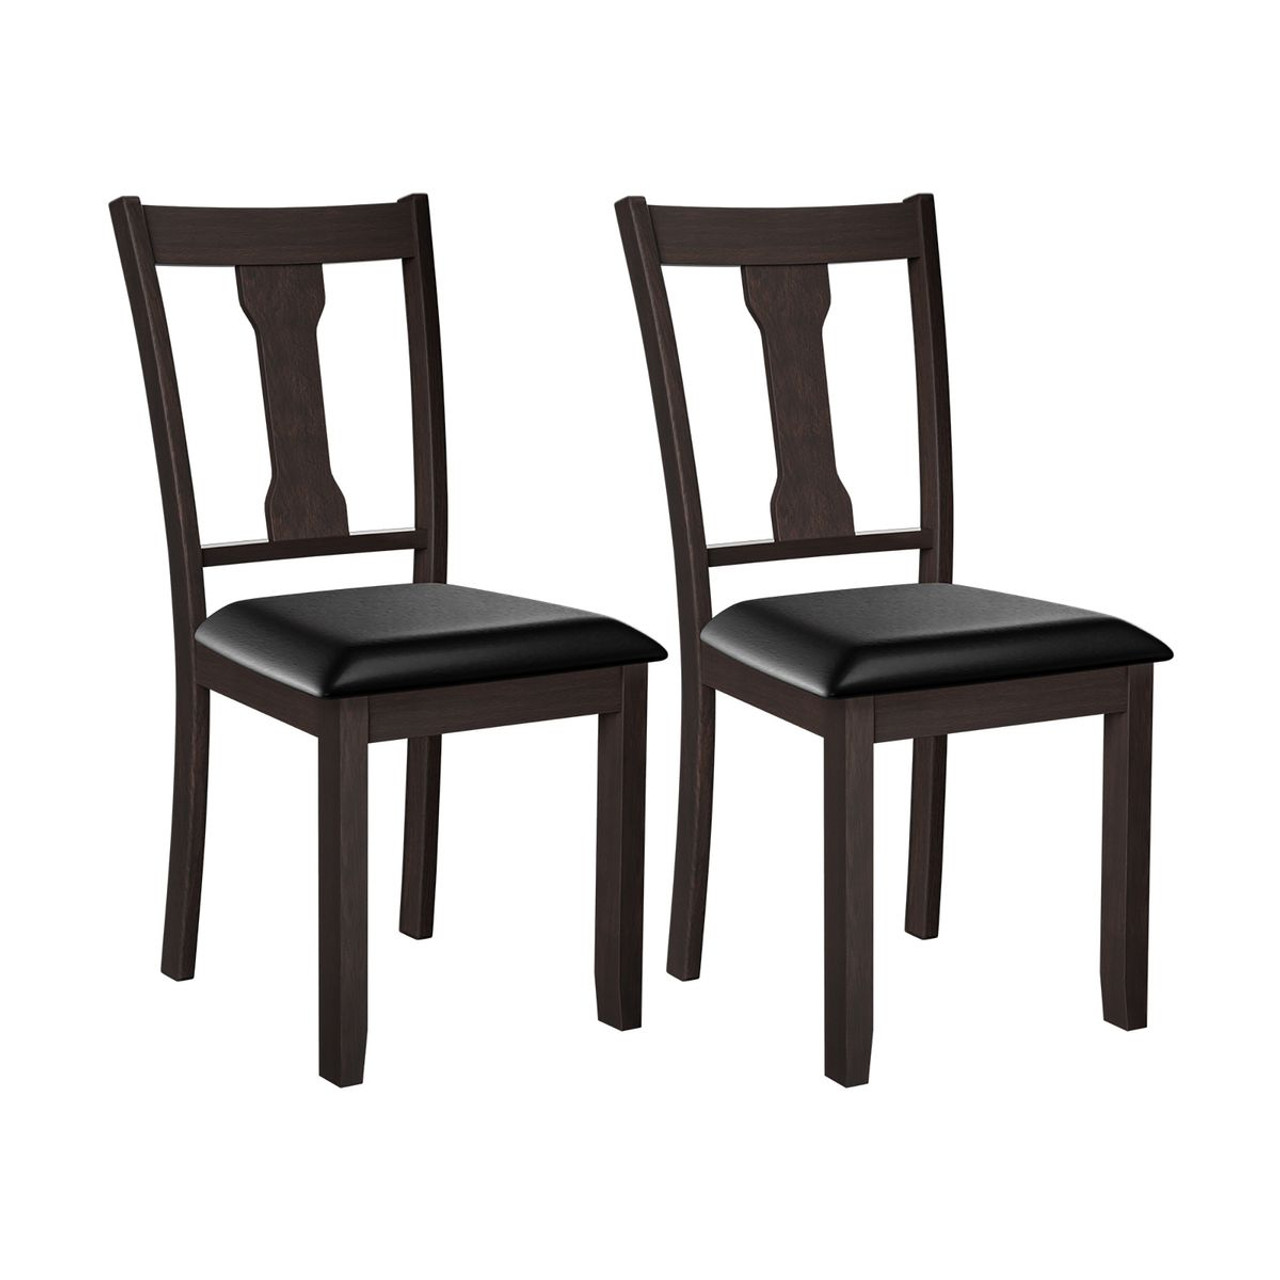 Dining Room Chairs with Rubberwood Frame & Upholstered Padded Seat (Set of 2) product image